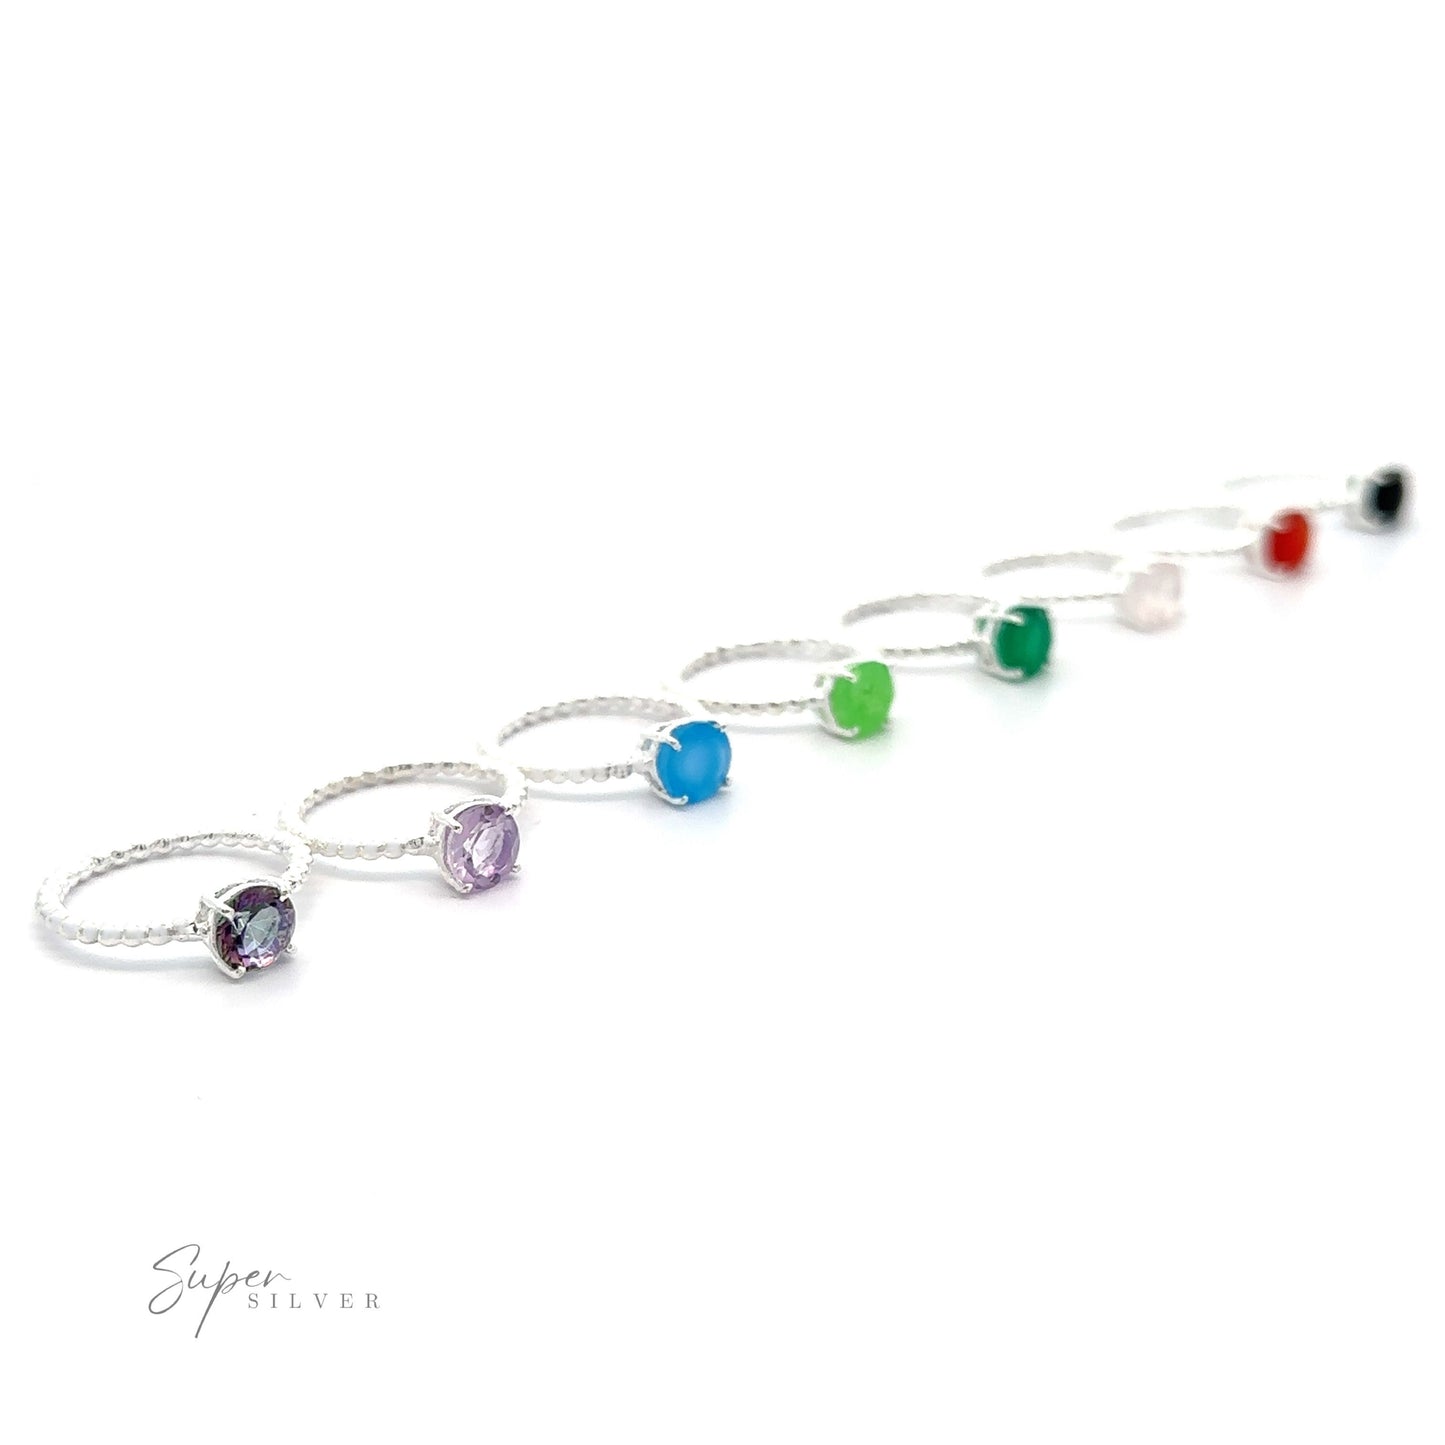 A collection of Stunning Circular Gemstone Rings with Beaded Bands in small sizes displayed in a diagonal line on a white background.